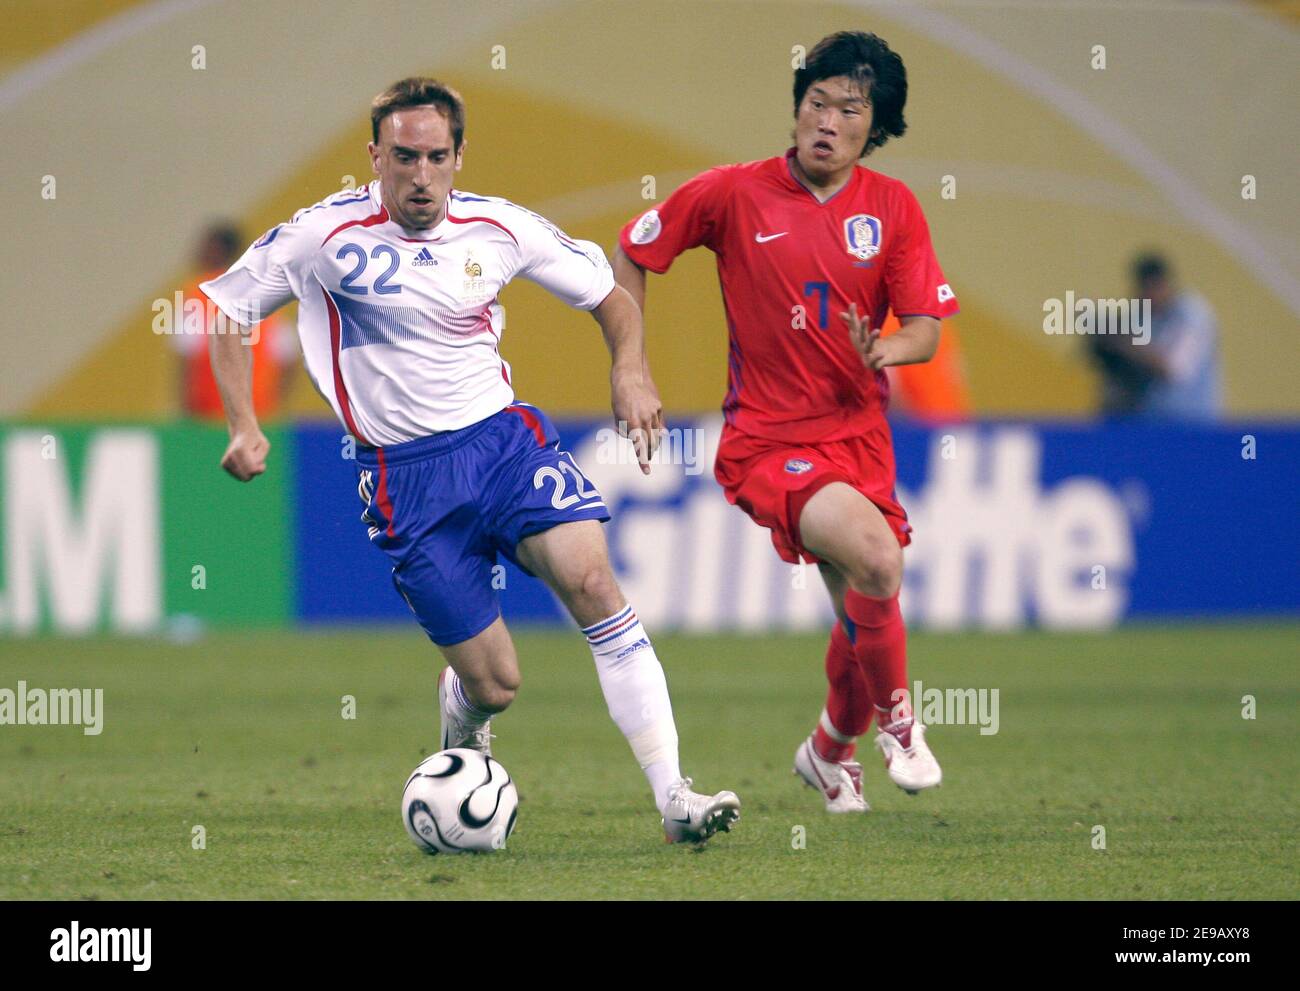 France's Franck Ribery in action during the World Cup 2006, Group G France vs South Korea, in Leipzig, Germany, on June 18, 2006. The game ended in draw 1-1. Photo by Gouhier-Hahn-Orban/Cameleon/ABACAPRESS.COM Stock Photo